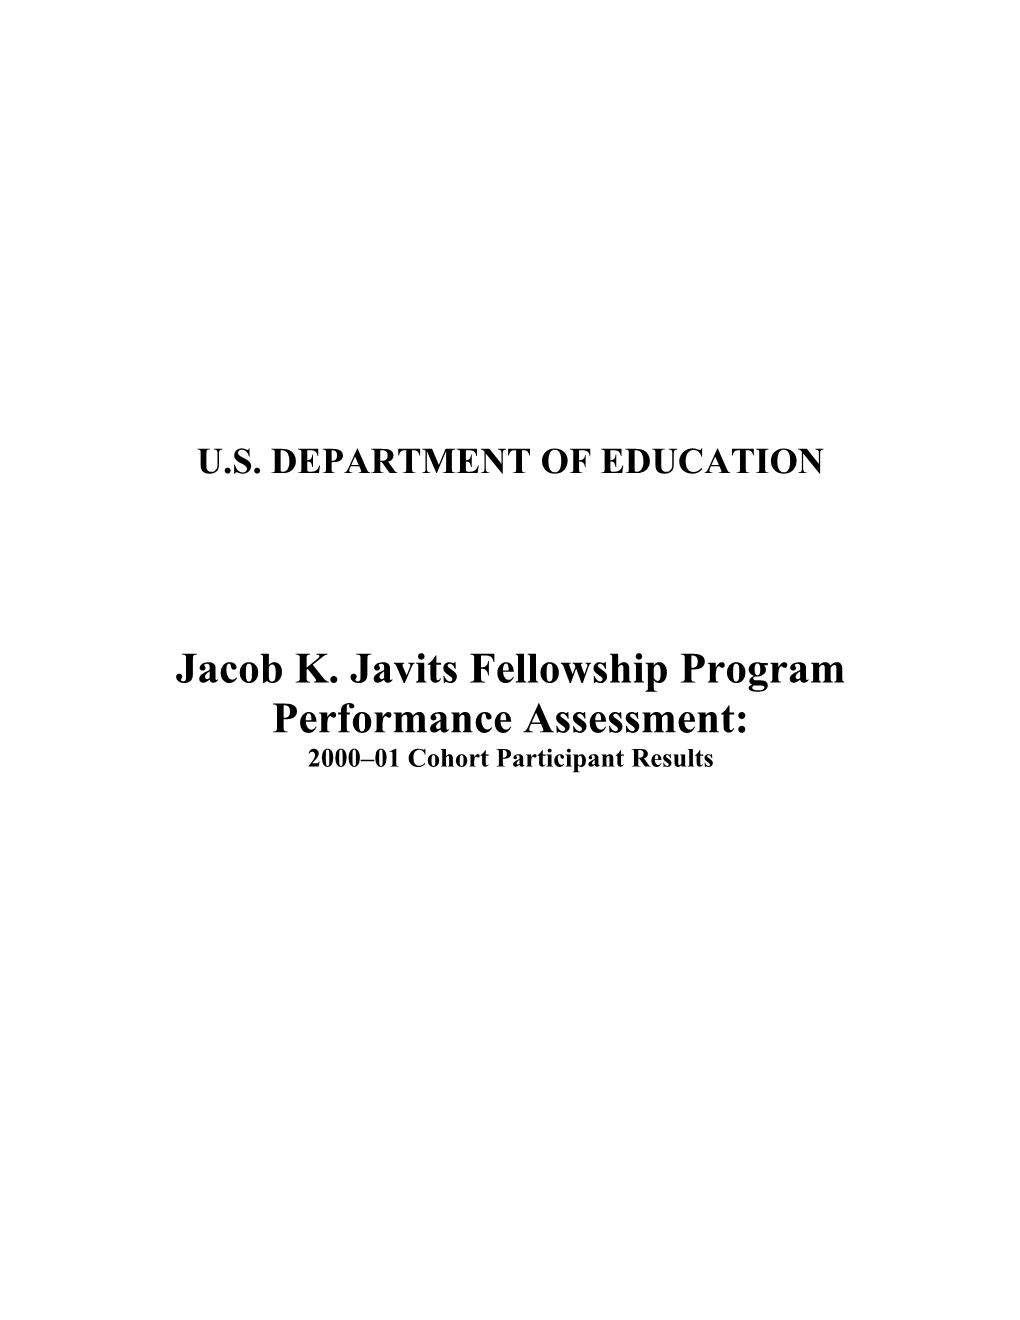 2000-01 Cohort Participant Results: Performance Assessment for the Jacob Javits Fellowship